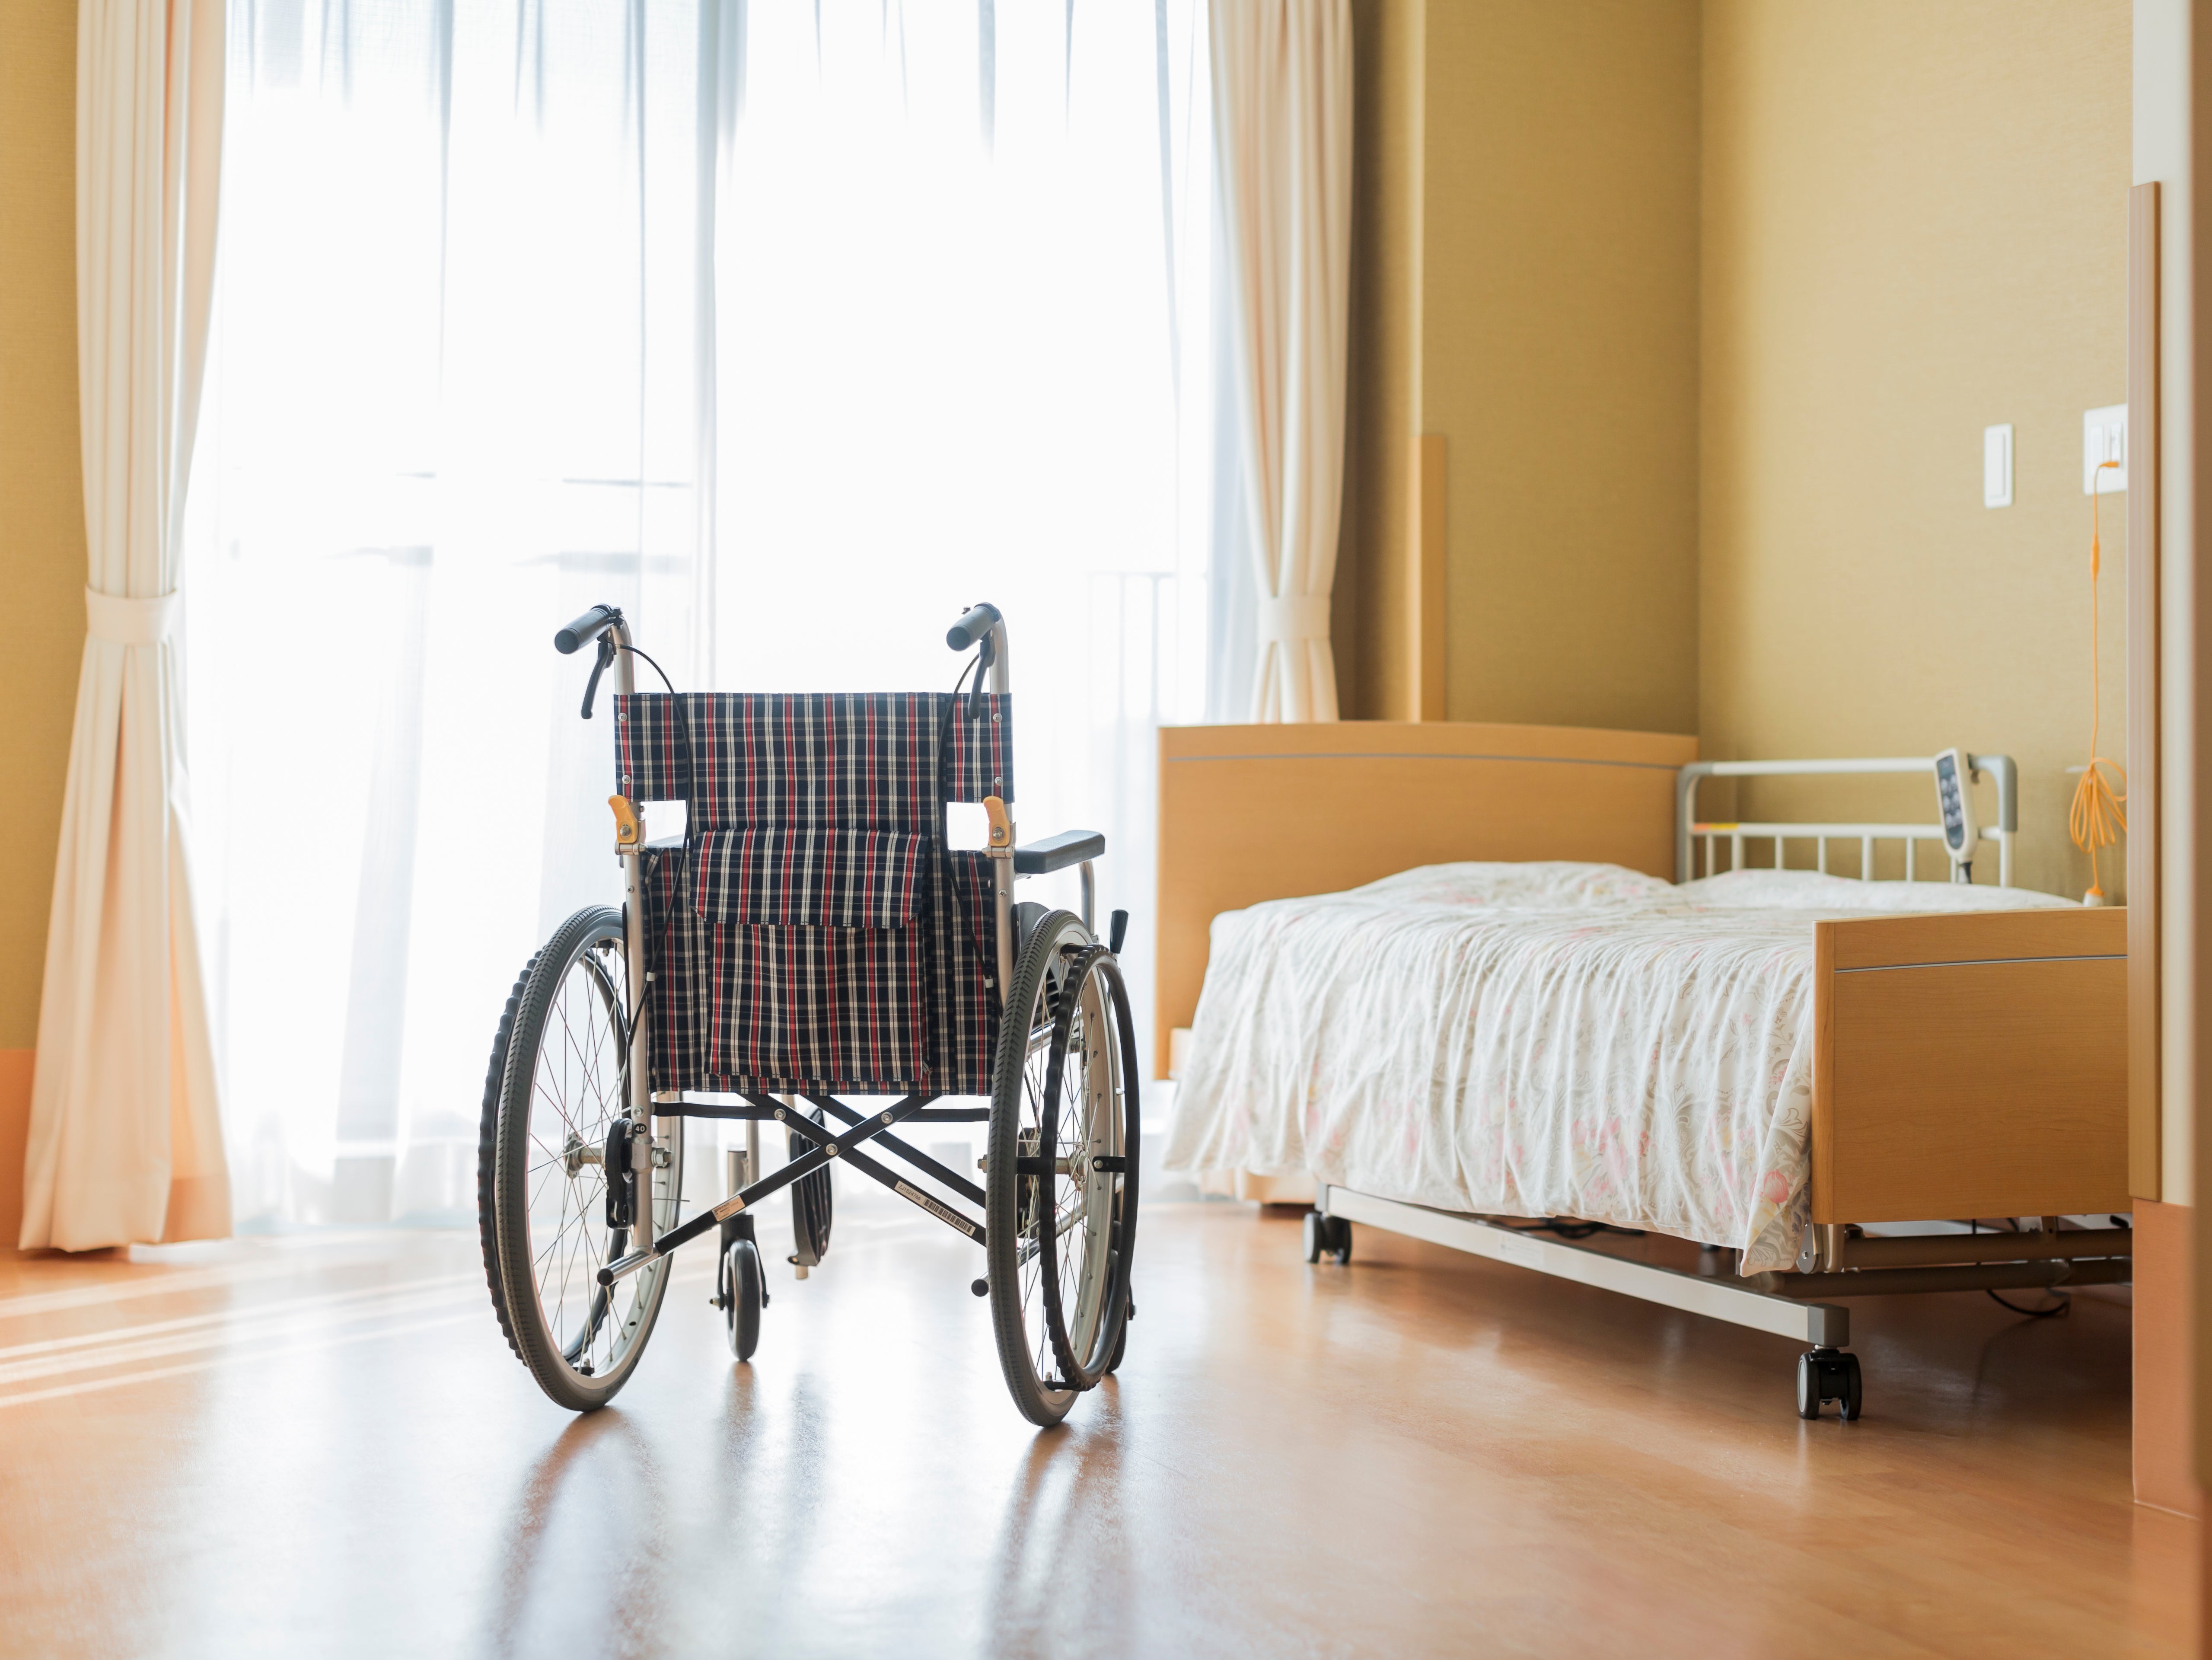 Vacancy rates in care homes hit 10 per cent in March